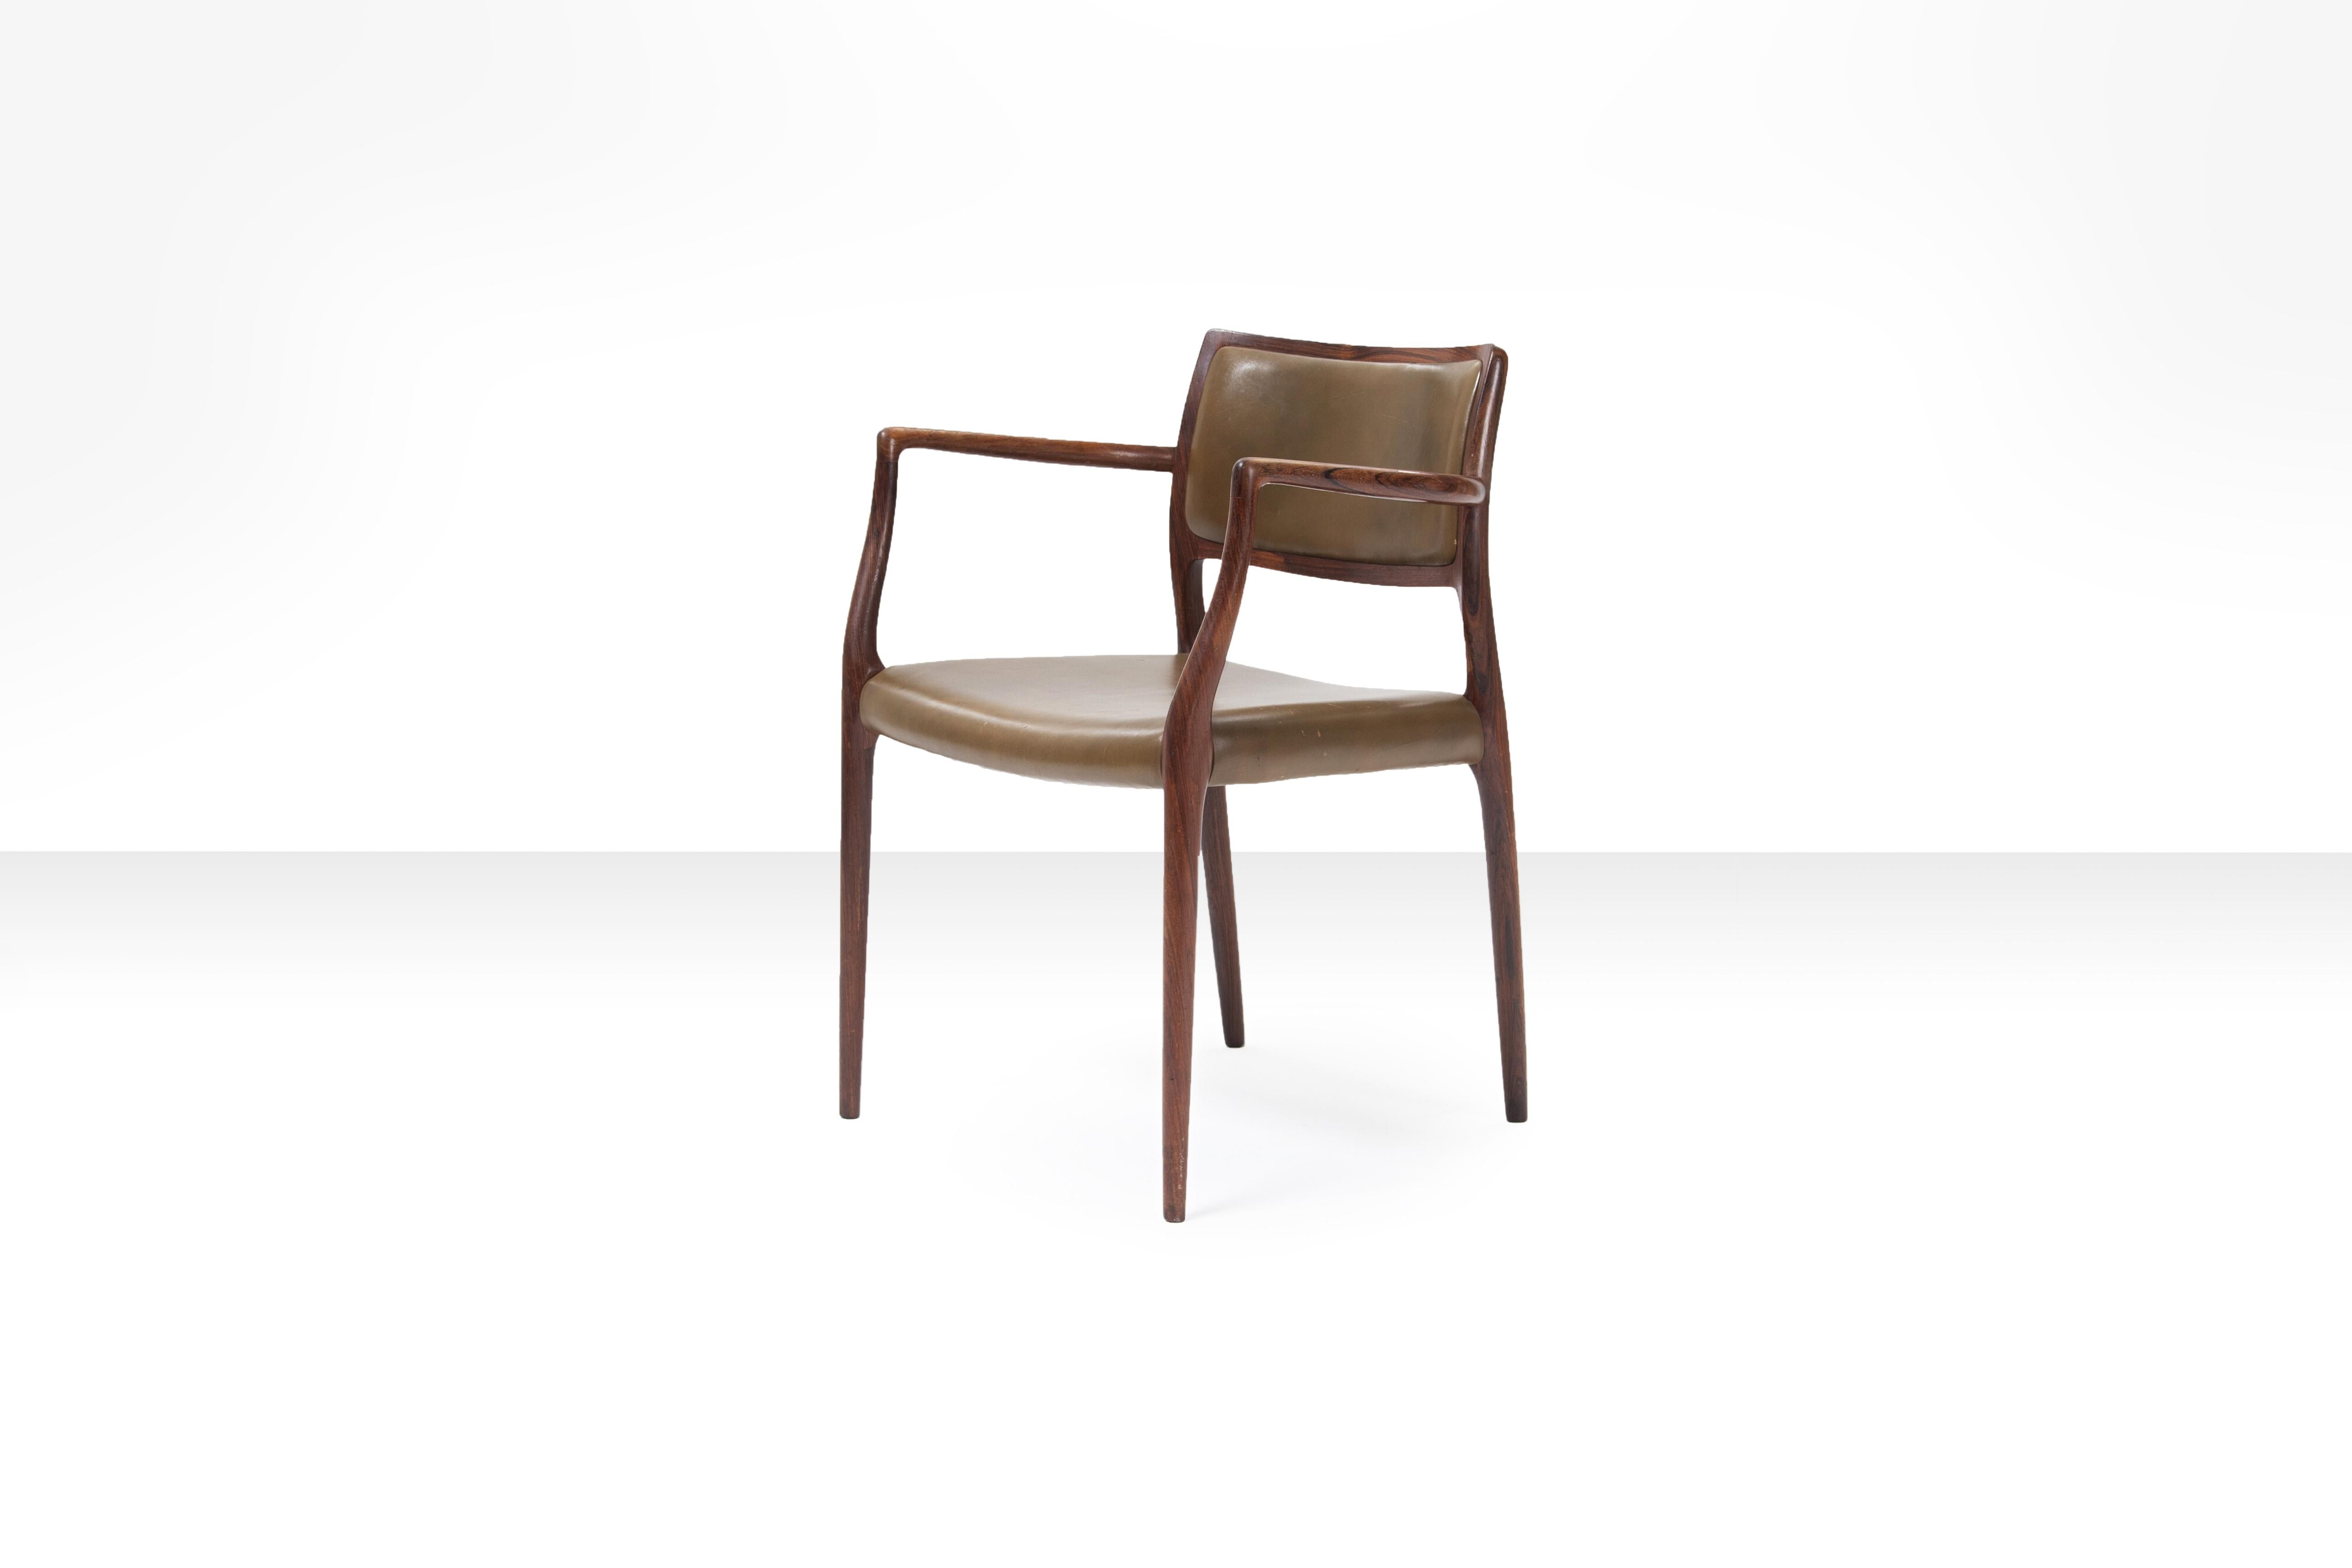 Rosewood Niels O. Møller 'Model 65' armchair with olive green leather seat and back, Denmark, 1960s.

This armchair by Niels Otto Møller will be packaged and shipped with the greatest care and attention to make sure you will receive the work in